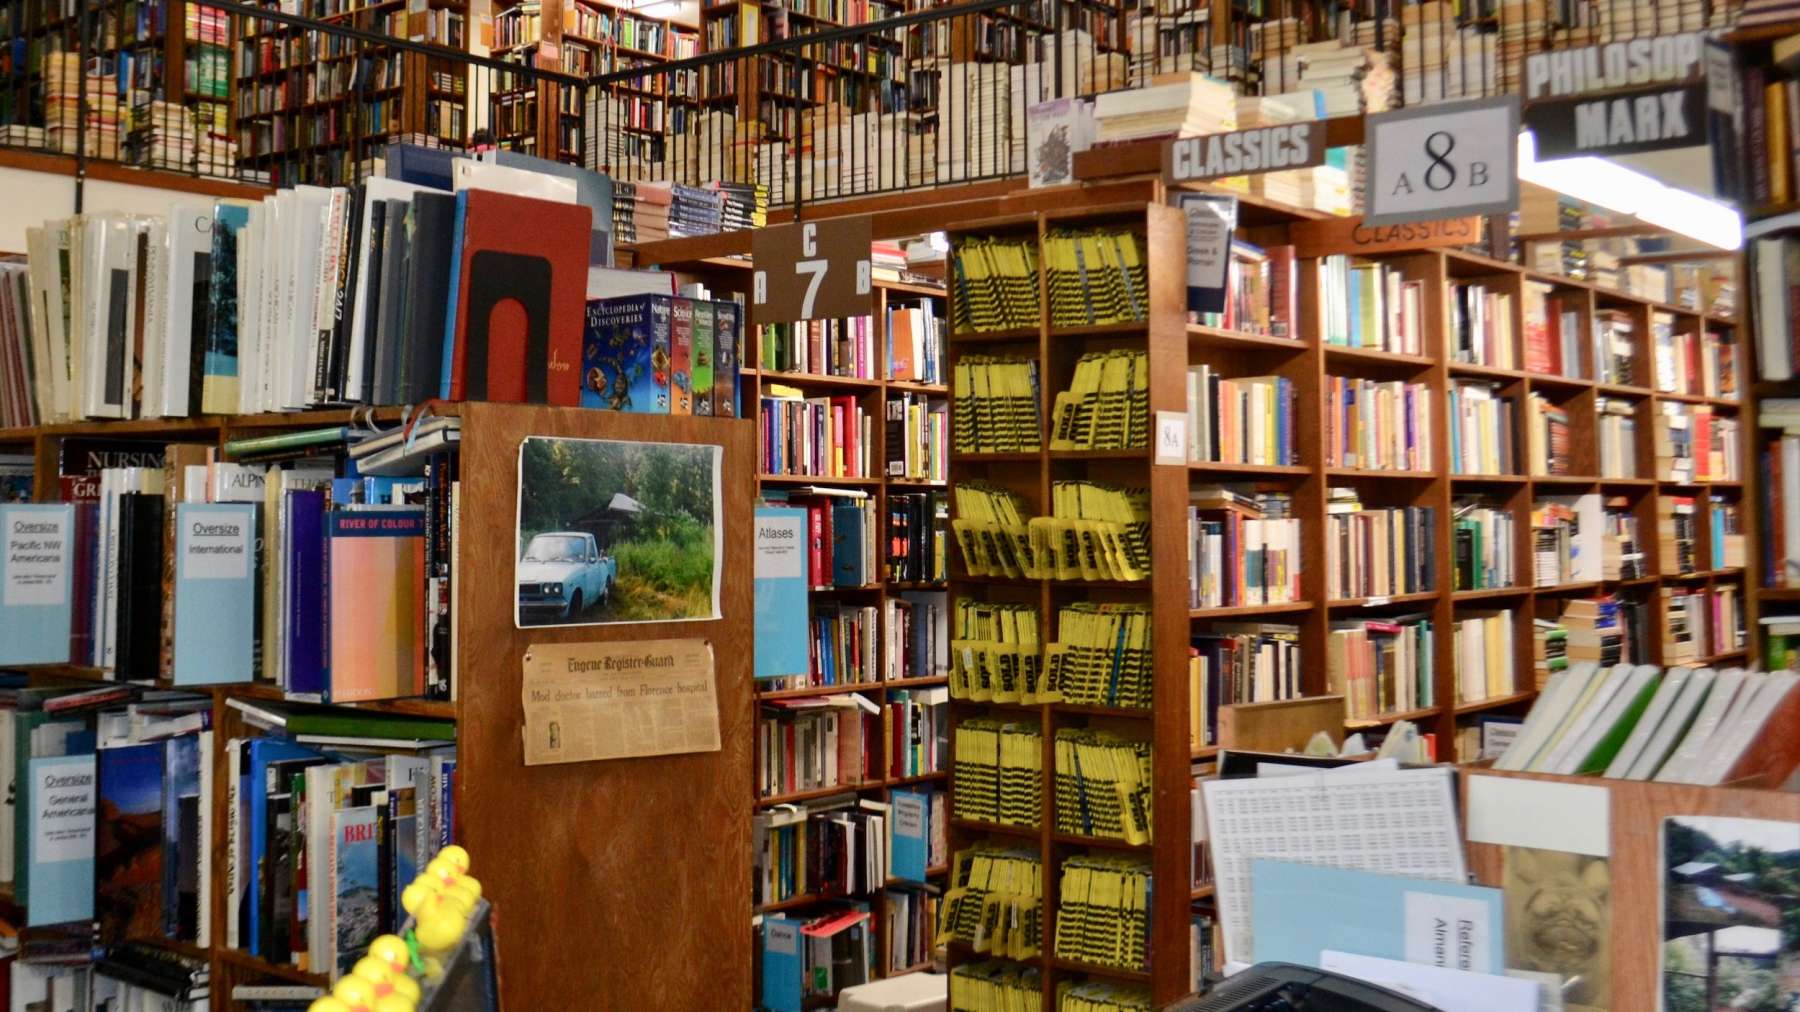 Rhode Island News: Gun stores are considered “essential businesses” but bookstores are not?